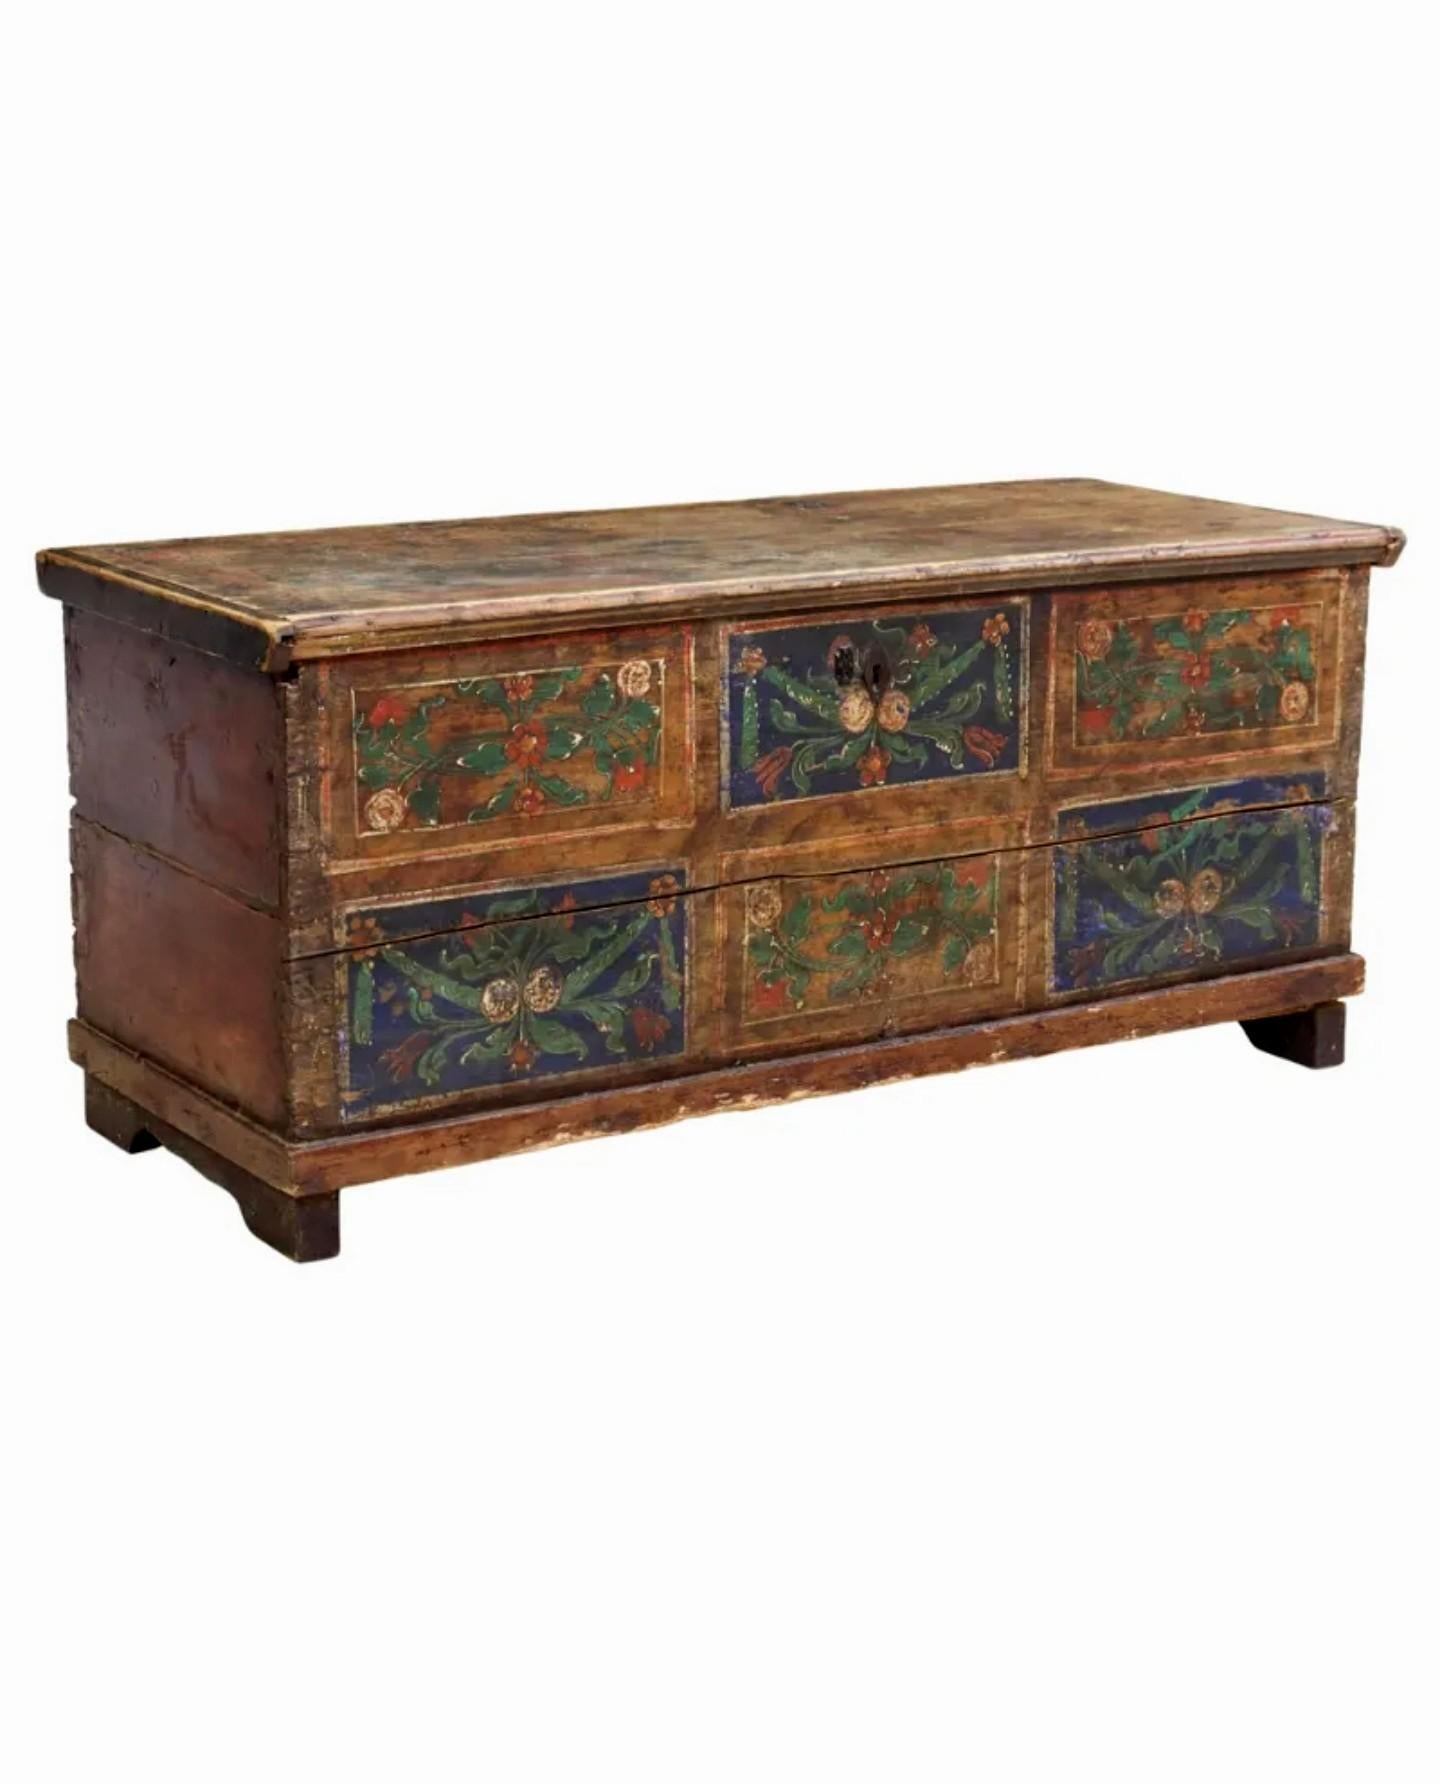 A charming rustic antique Scandinavian paint-decorated pine storage trunk blanket chest with beautifully aged distressed patina.

Handcrafted of solid pine wood in Scandinavia in the early 19th century, likely Swedish, high quality handcut